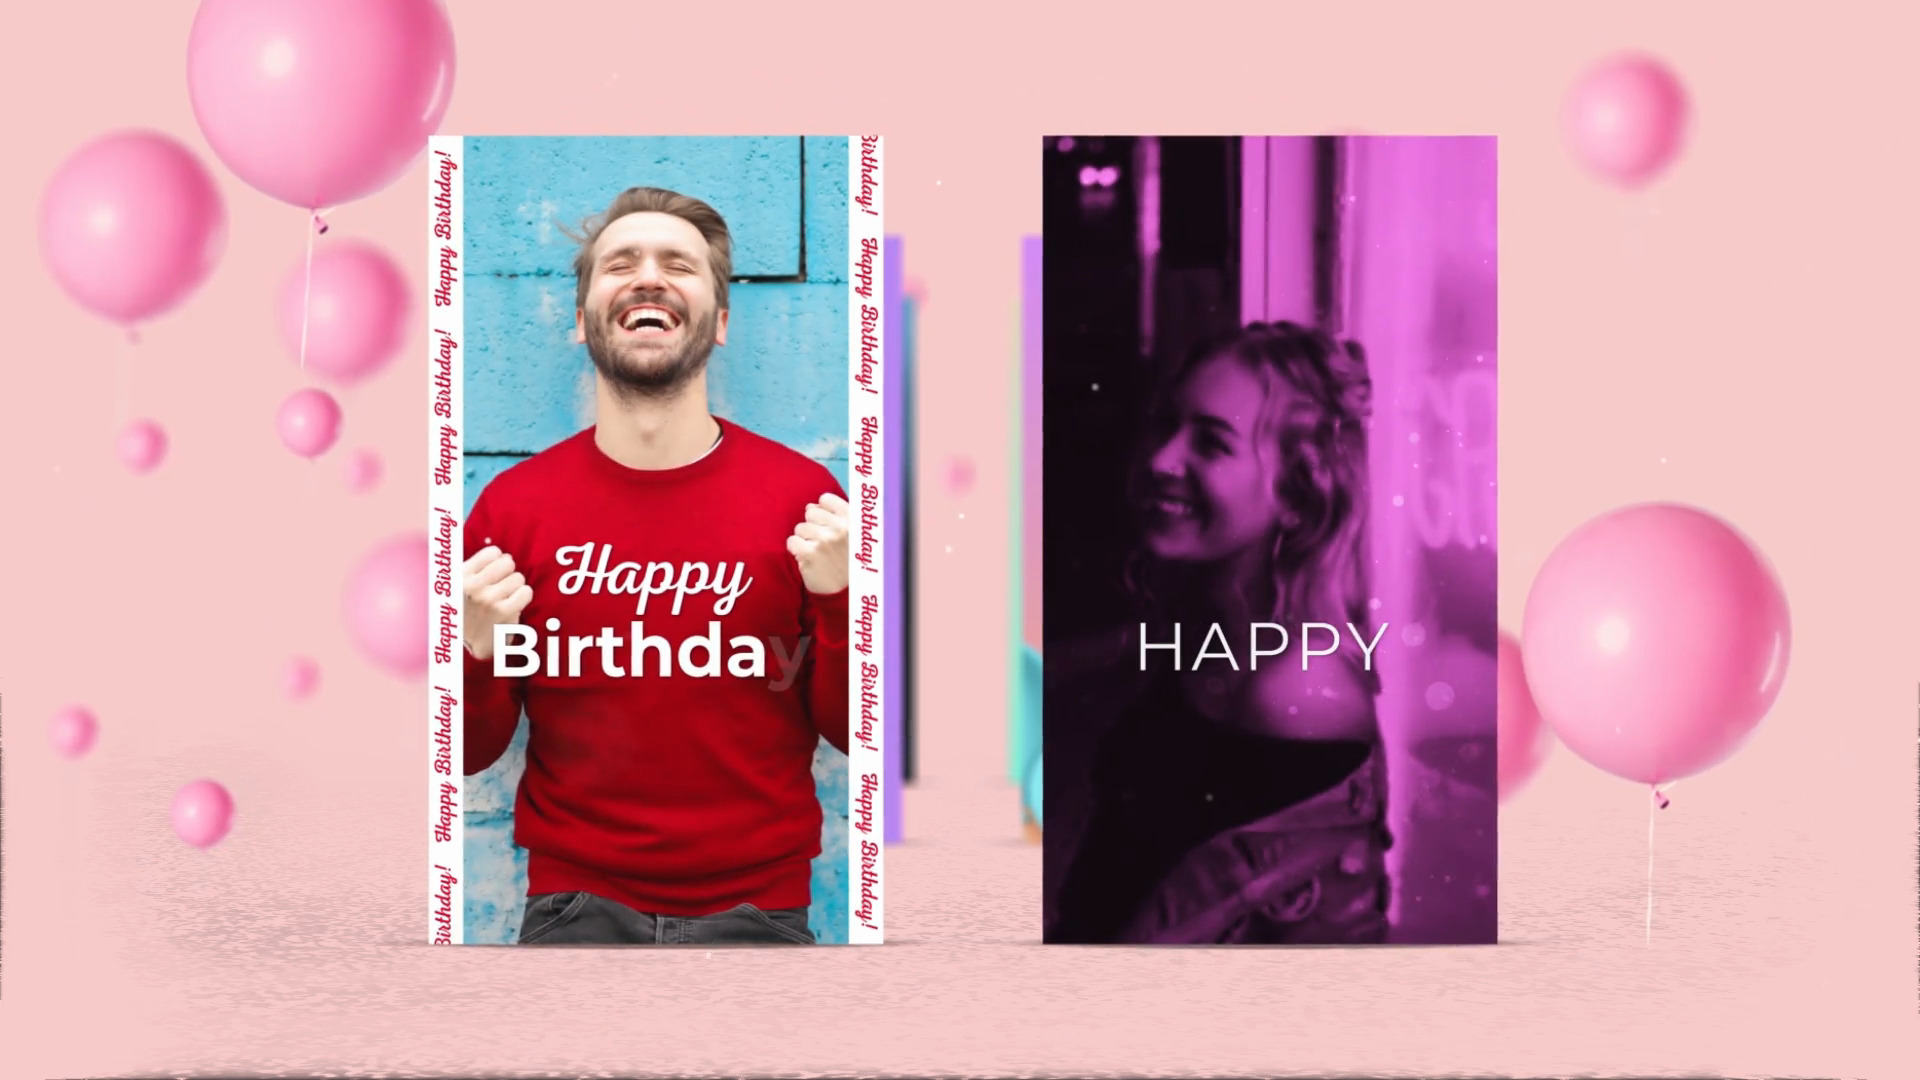 6 Top Happy Birthday Video Templates for After Effects—Including 1 Free ...